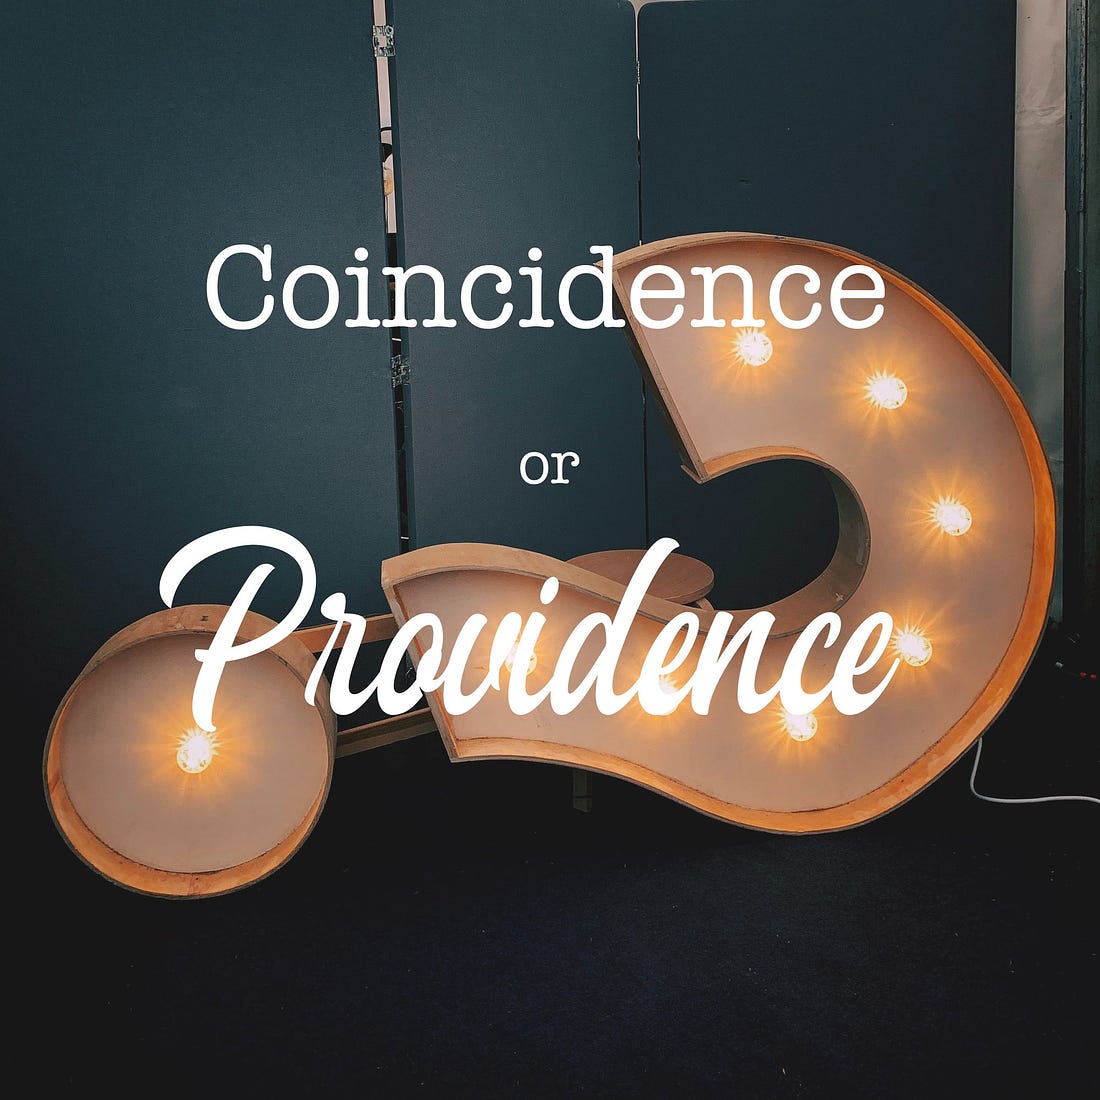 Coincidence or providence?